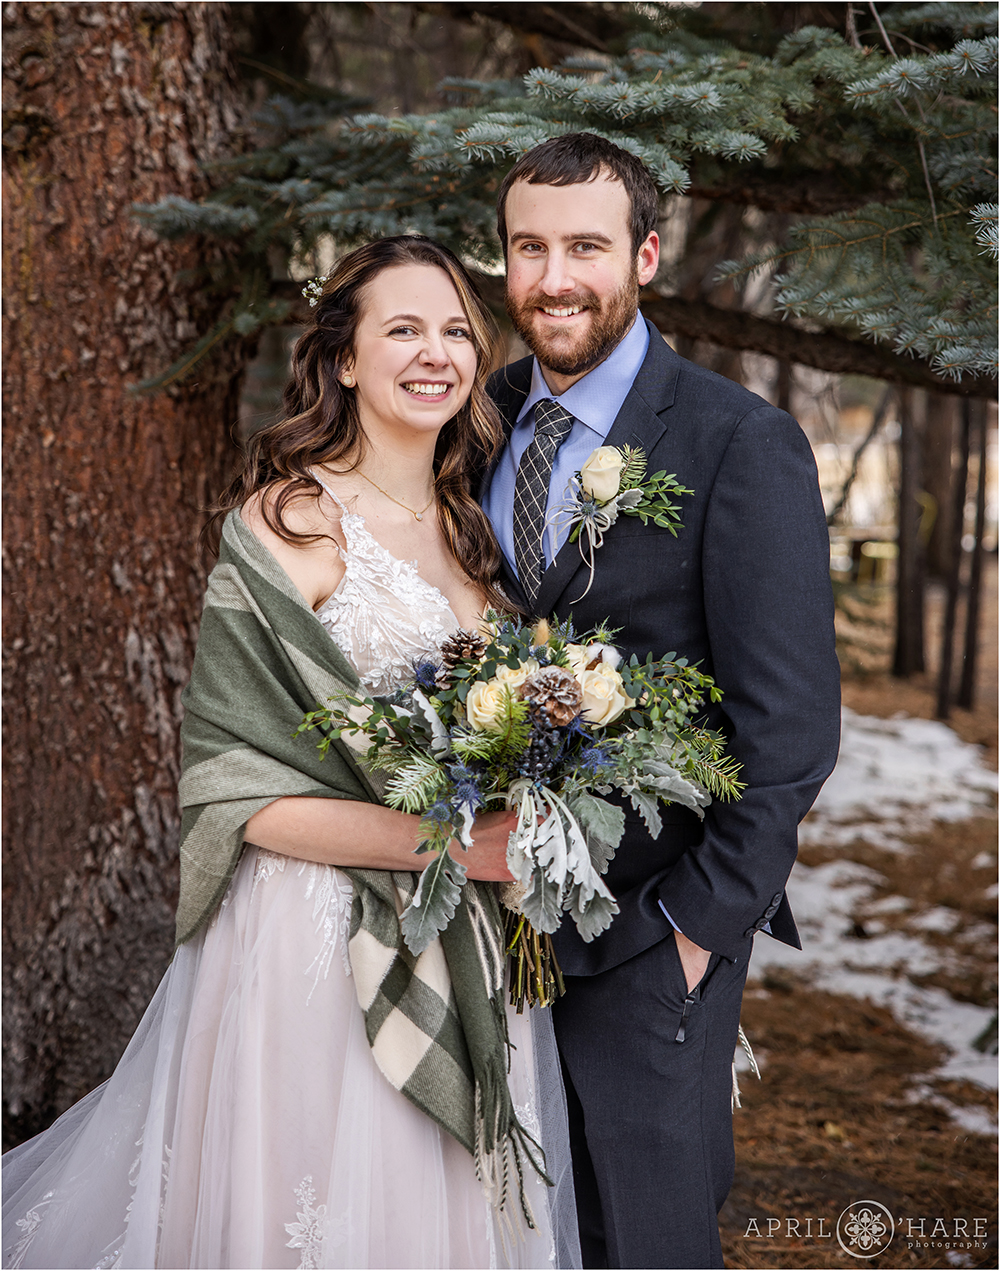 Beautiful outdoor wedding portrait in a forested area of Romantic Riversong Inn in Estes Park Colorado